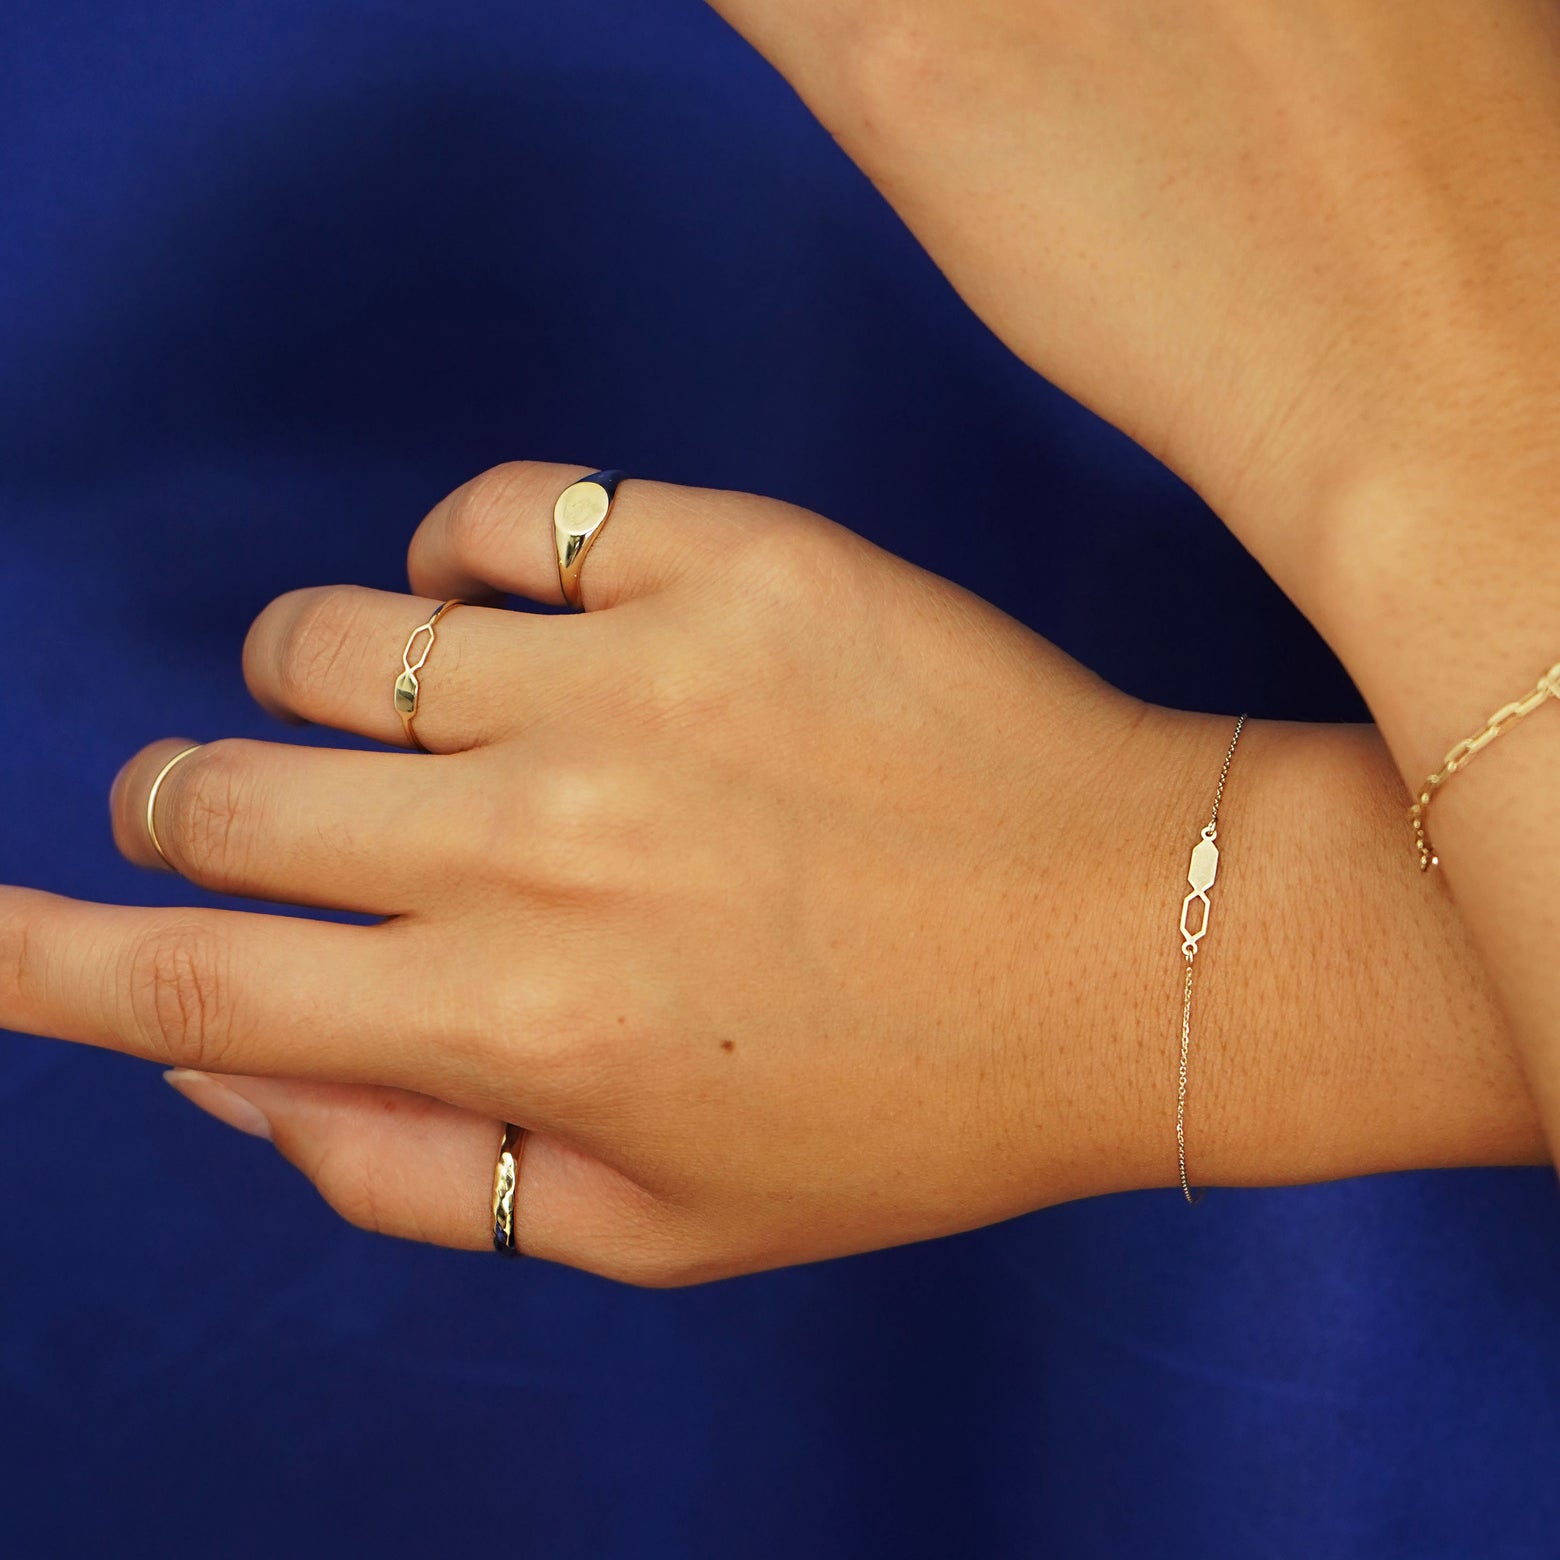 A model posing with their wrists crossed wearing a Tanlah Ring and other 14k solid gold jewelry